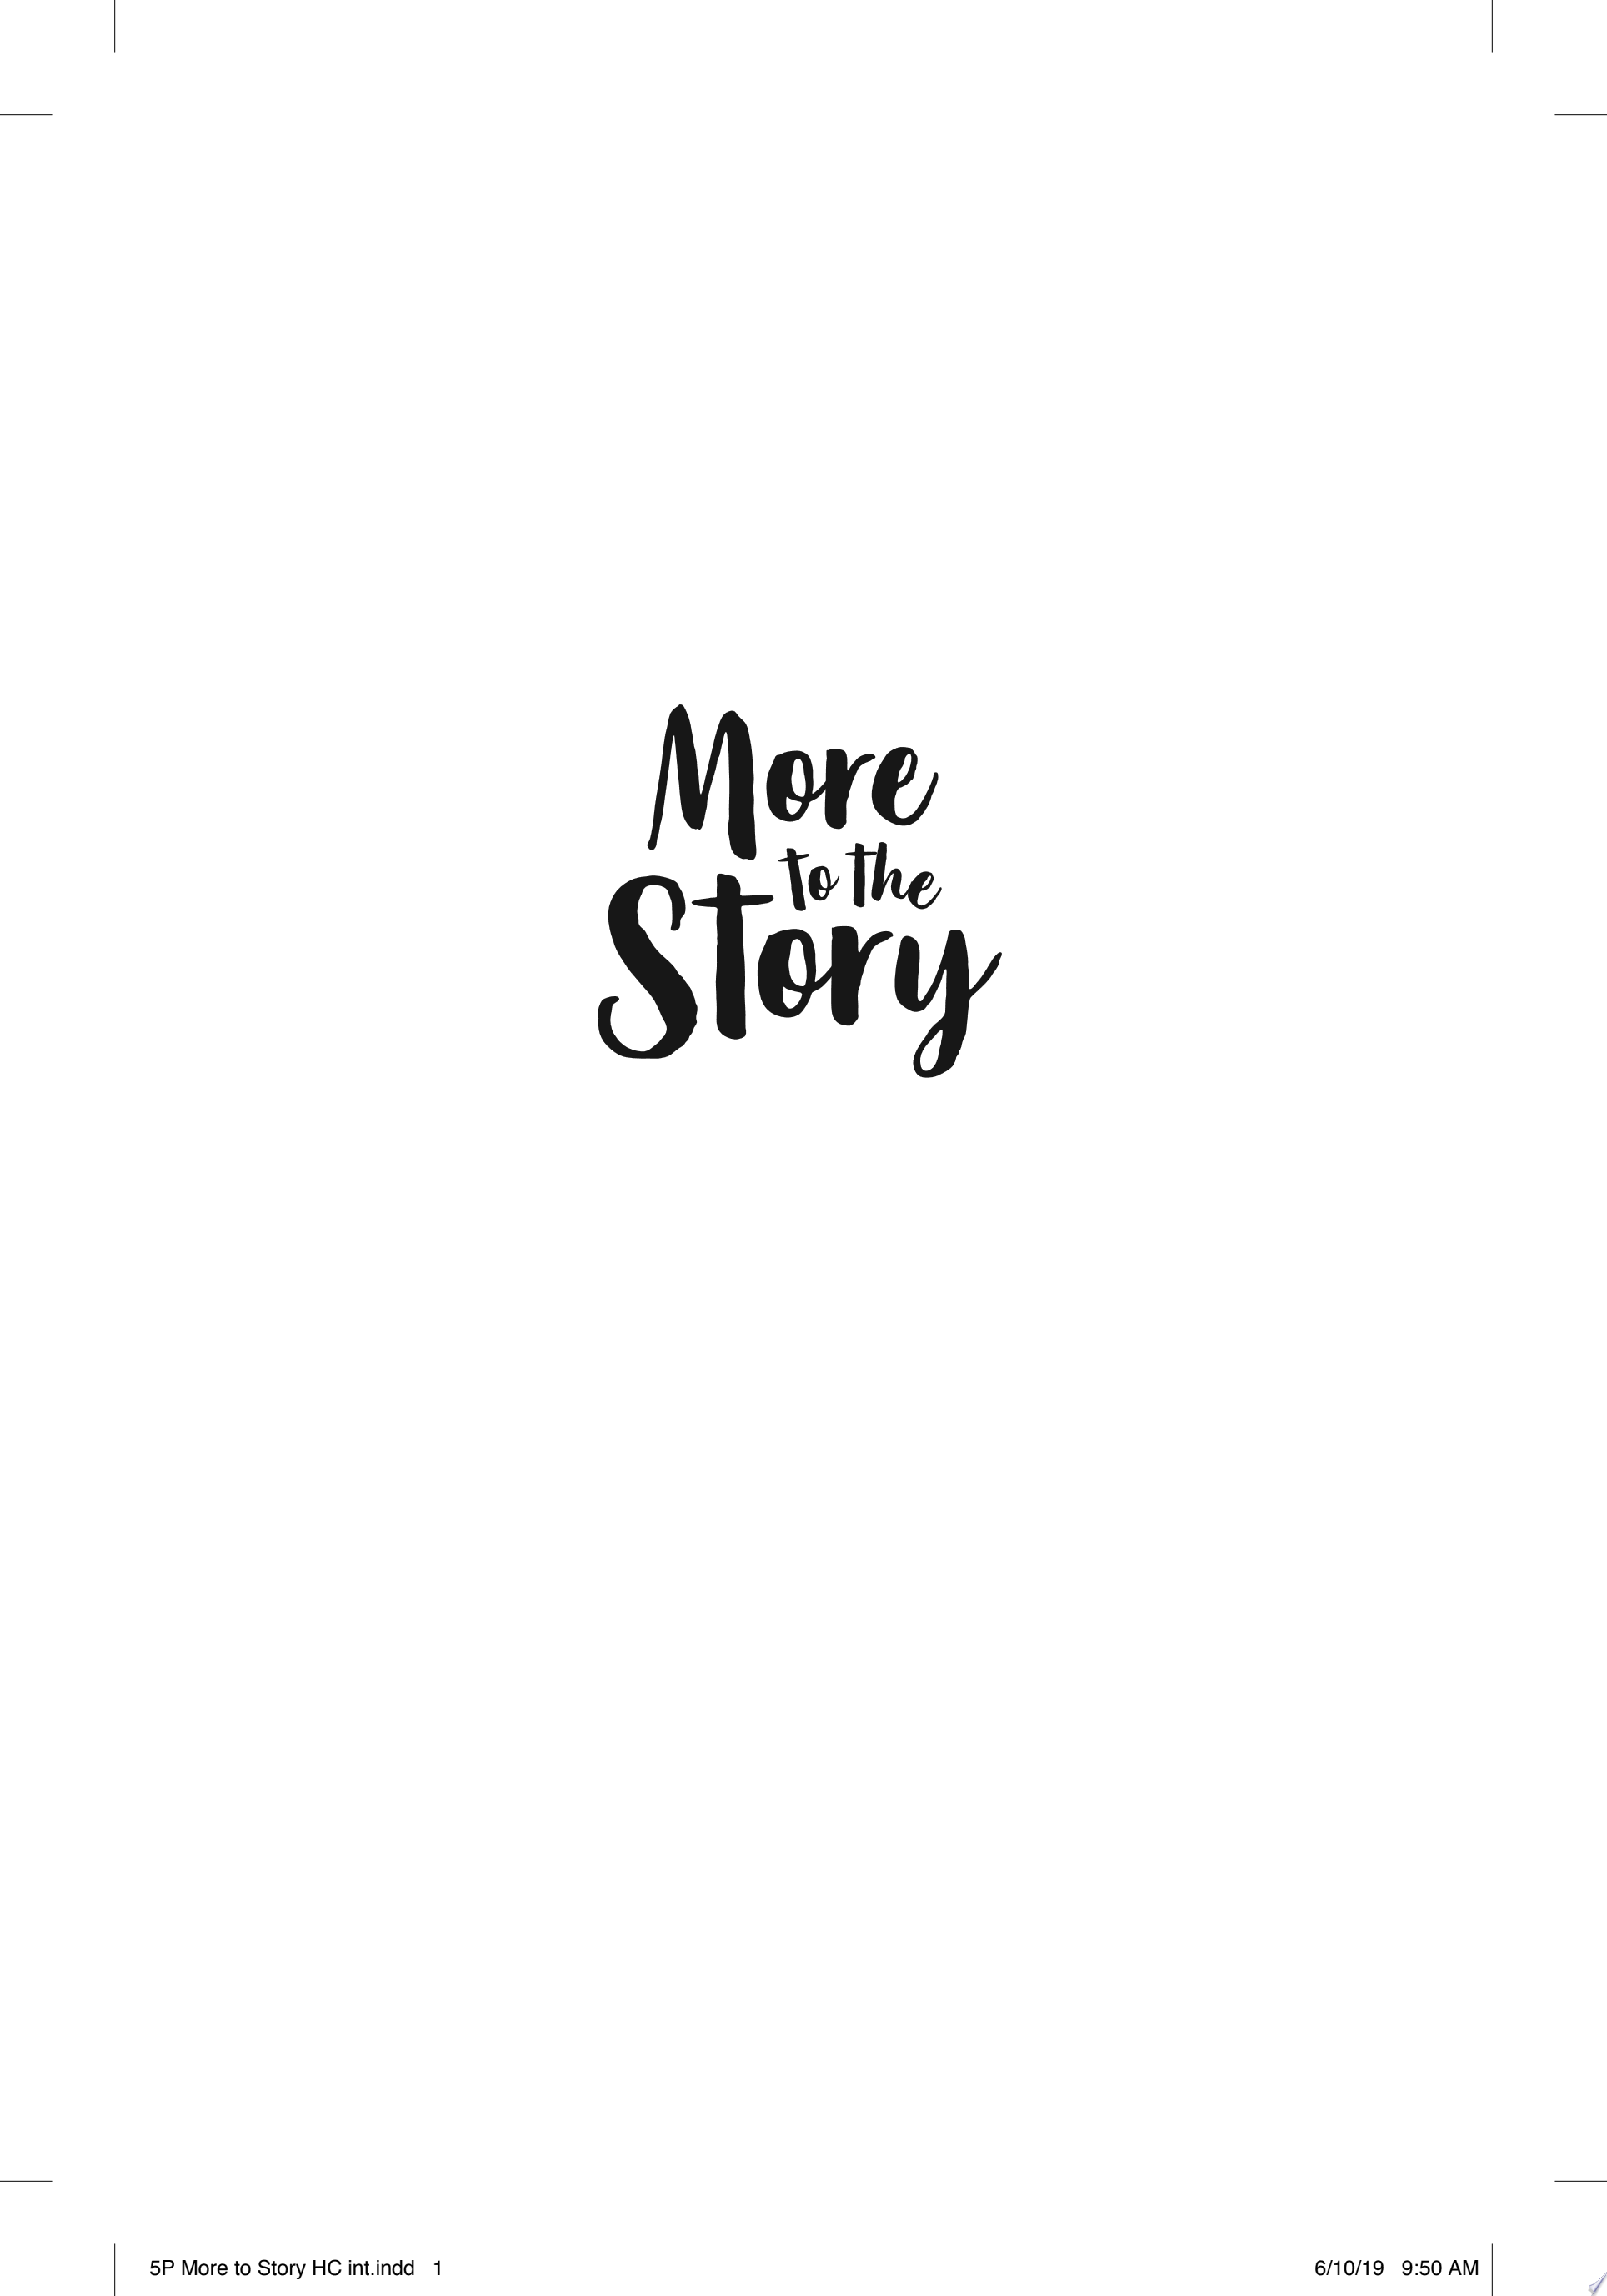 Image for "More to the Story"